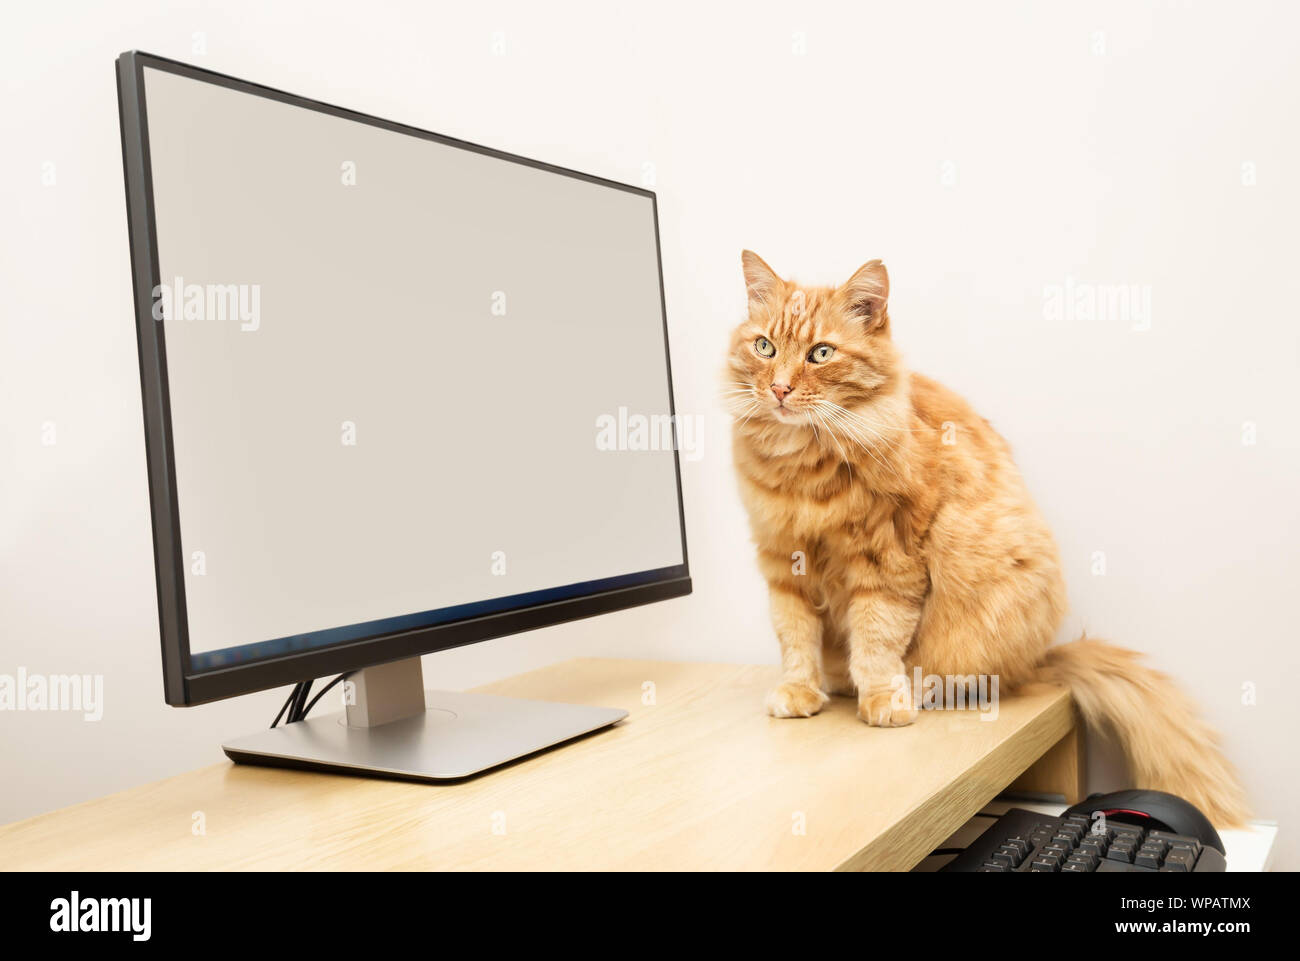 Close up of a ginger cat sitting on a table near computer. Stock Photo